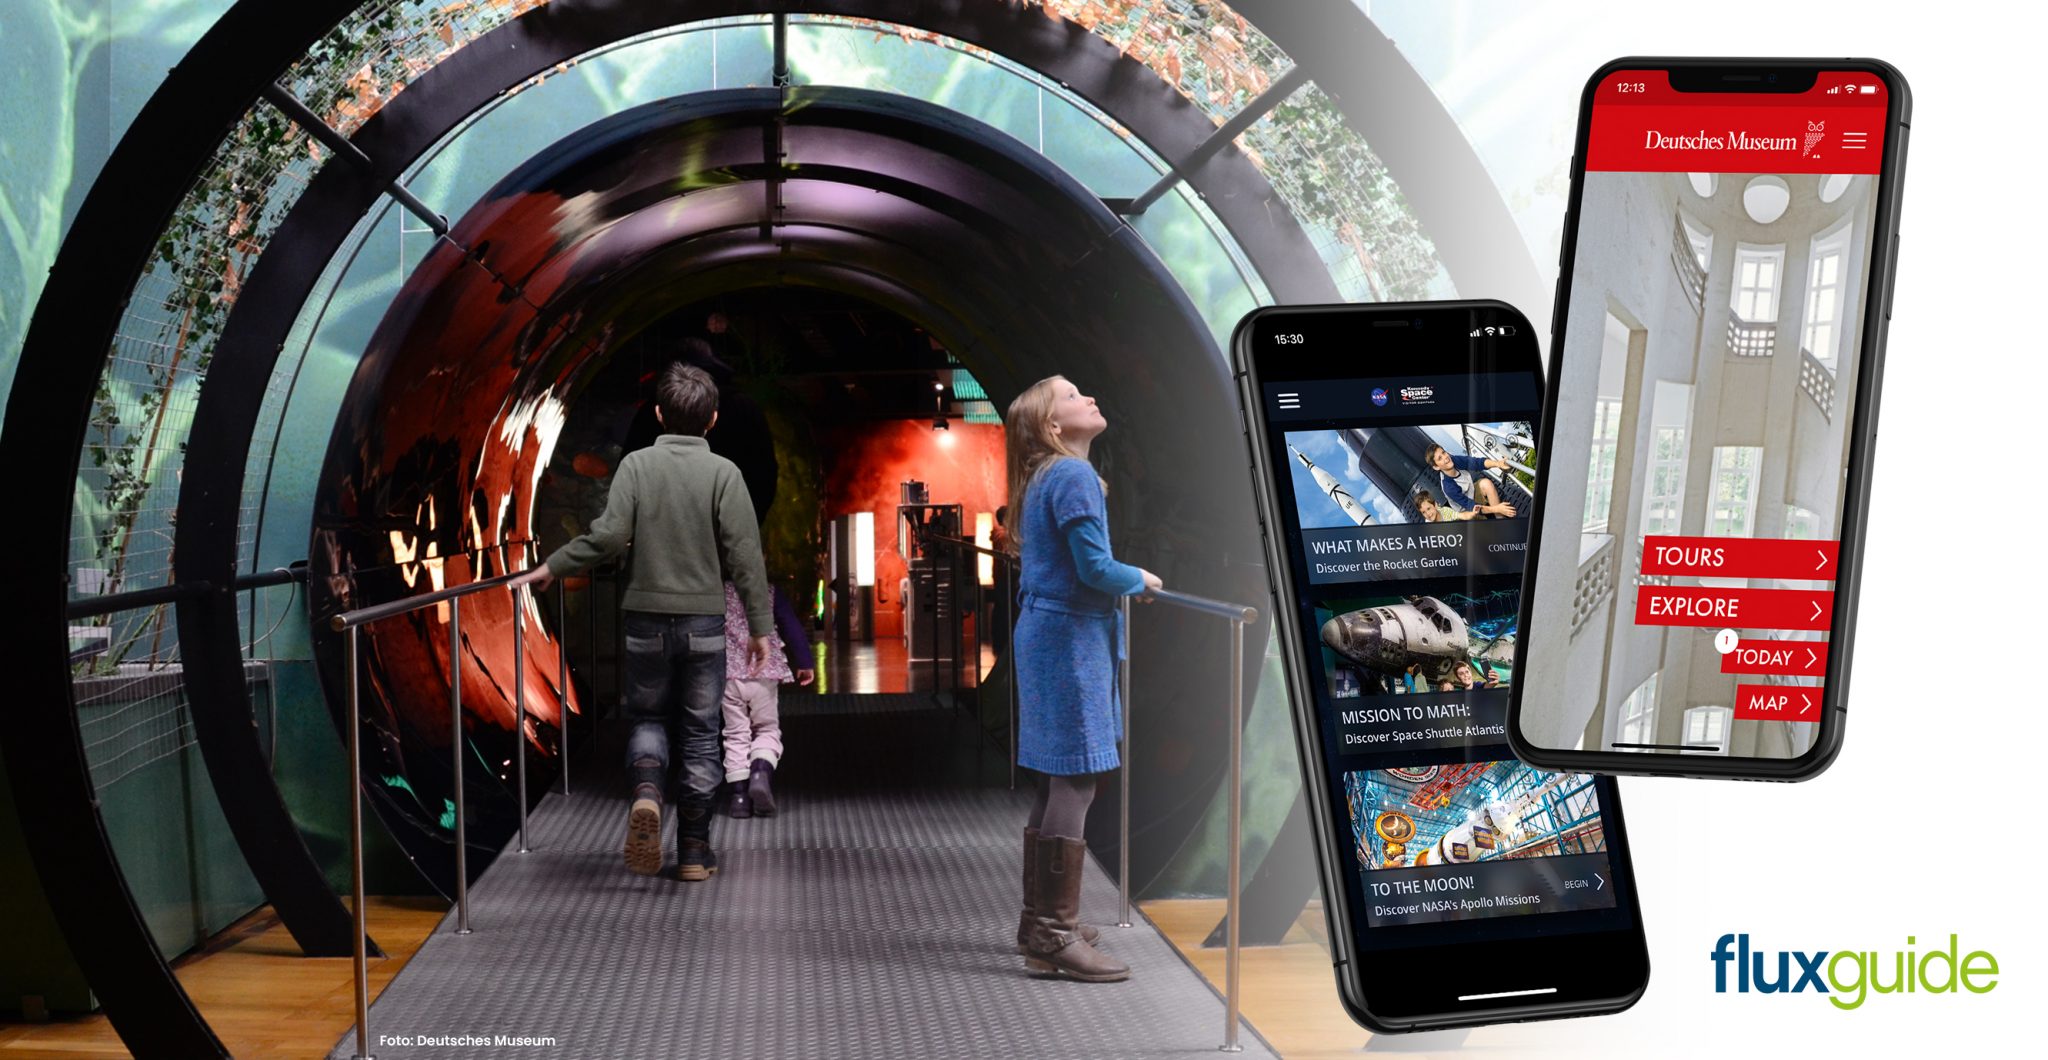 pictured is a glass round tunnel with a man walking away from the viewer and a young woman standing on the right side looking up through the glass. On the right of the image are two iphones showing the fluxguide app and the information it shares with guests at museums.